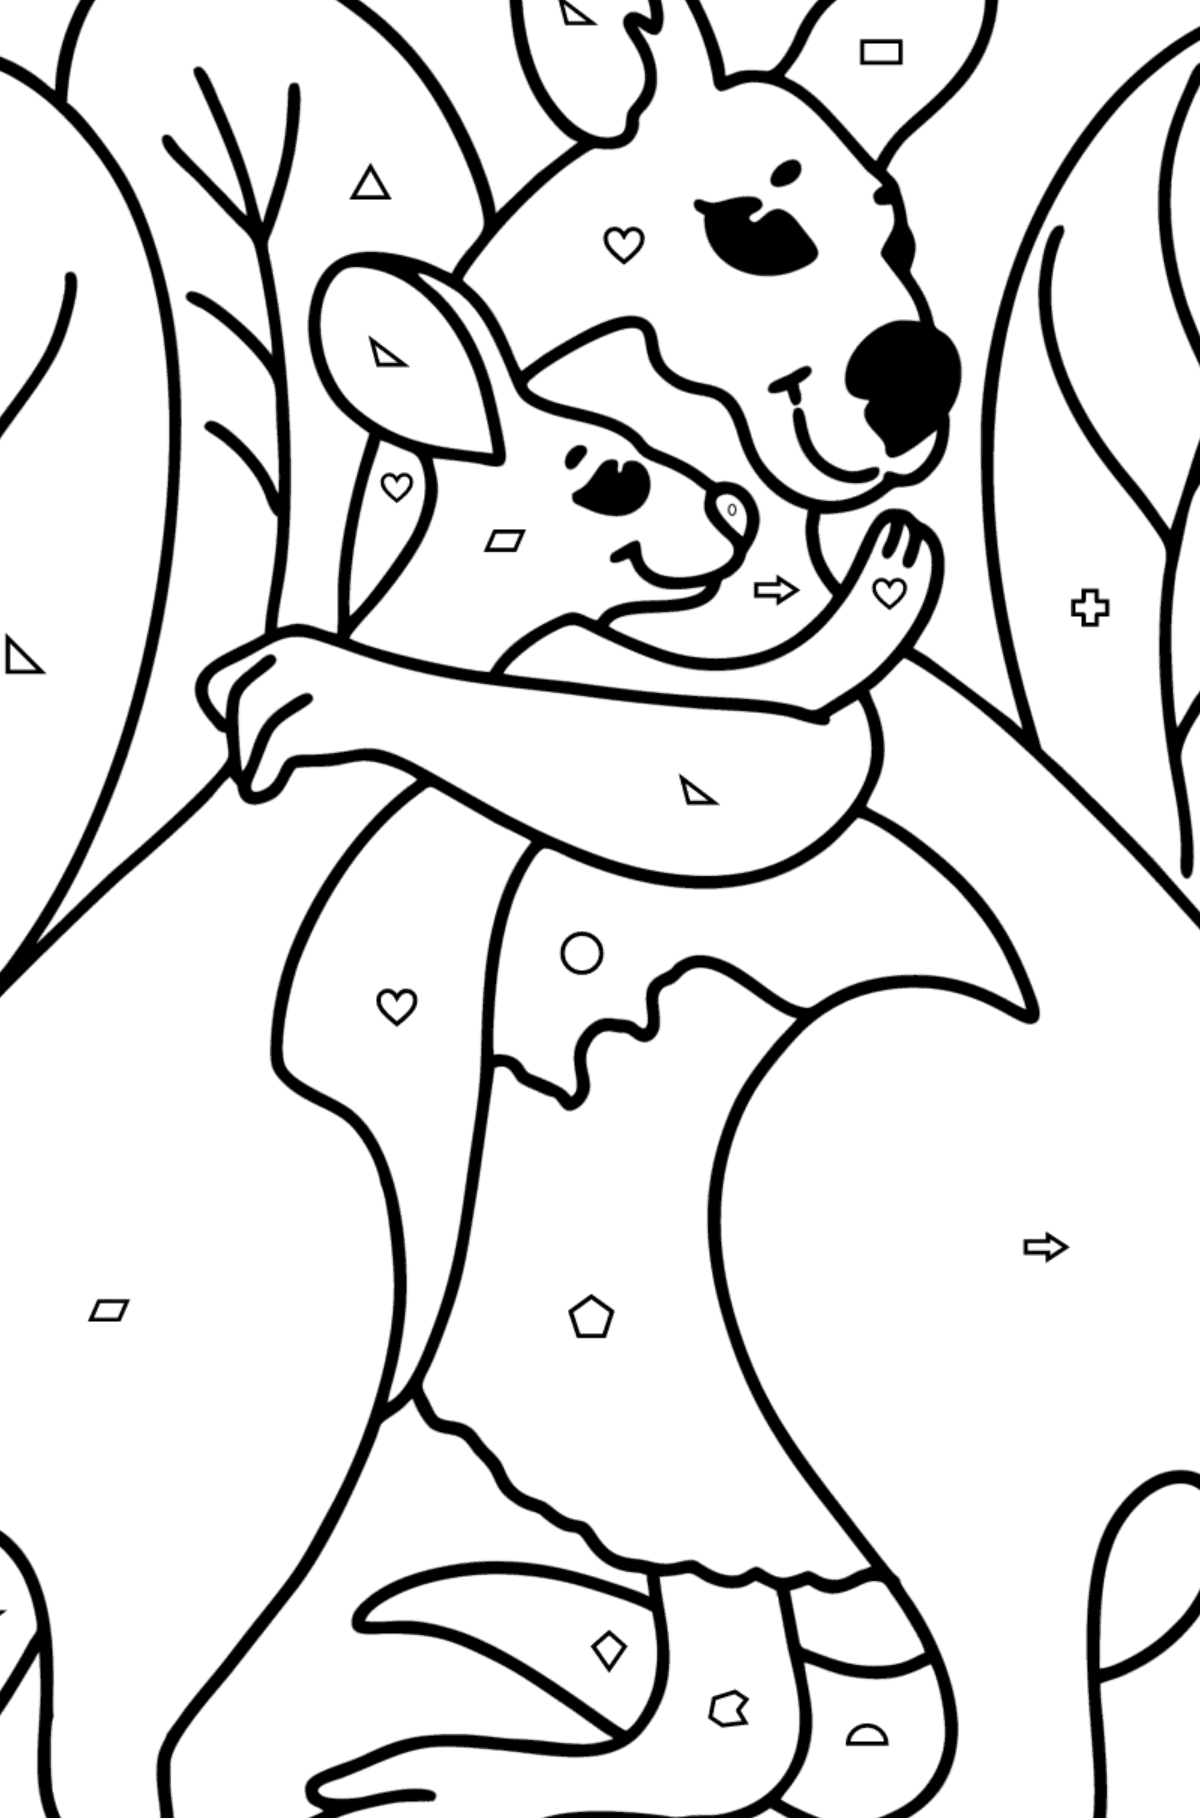 Coloring page - cute kangaroo - Coloring by Geometric Shapes for Kids